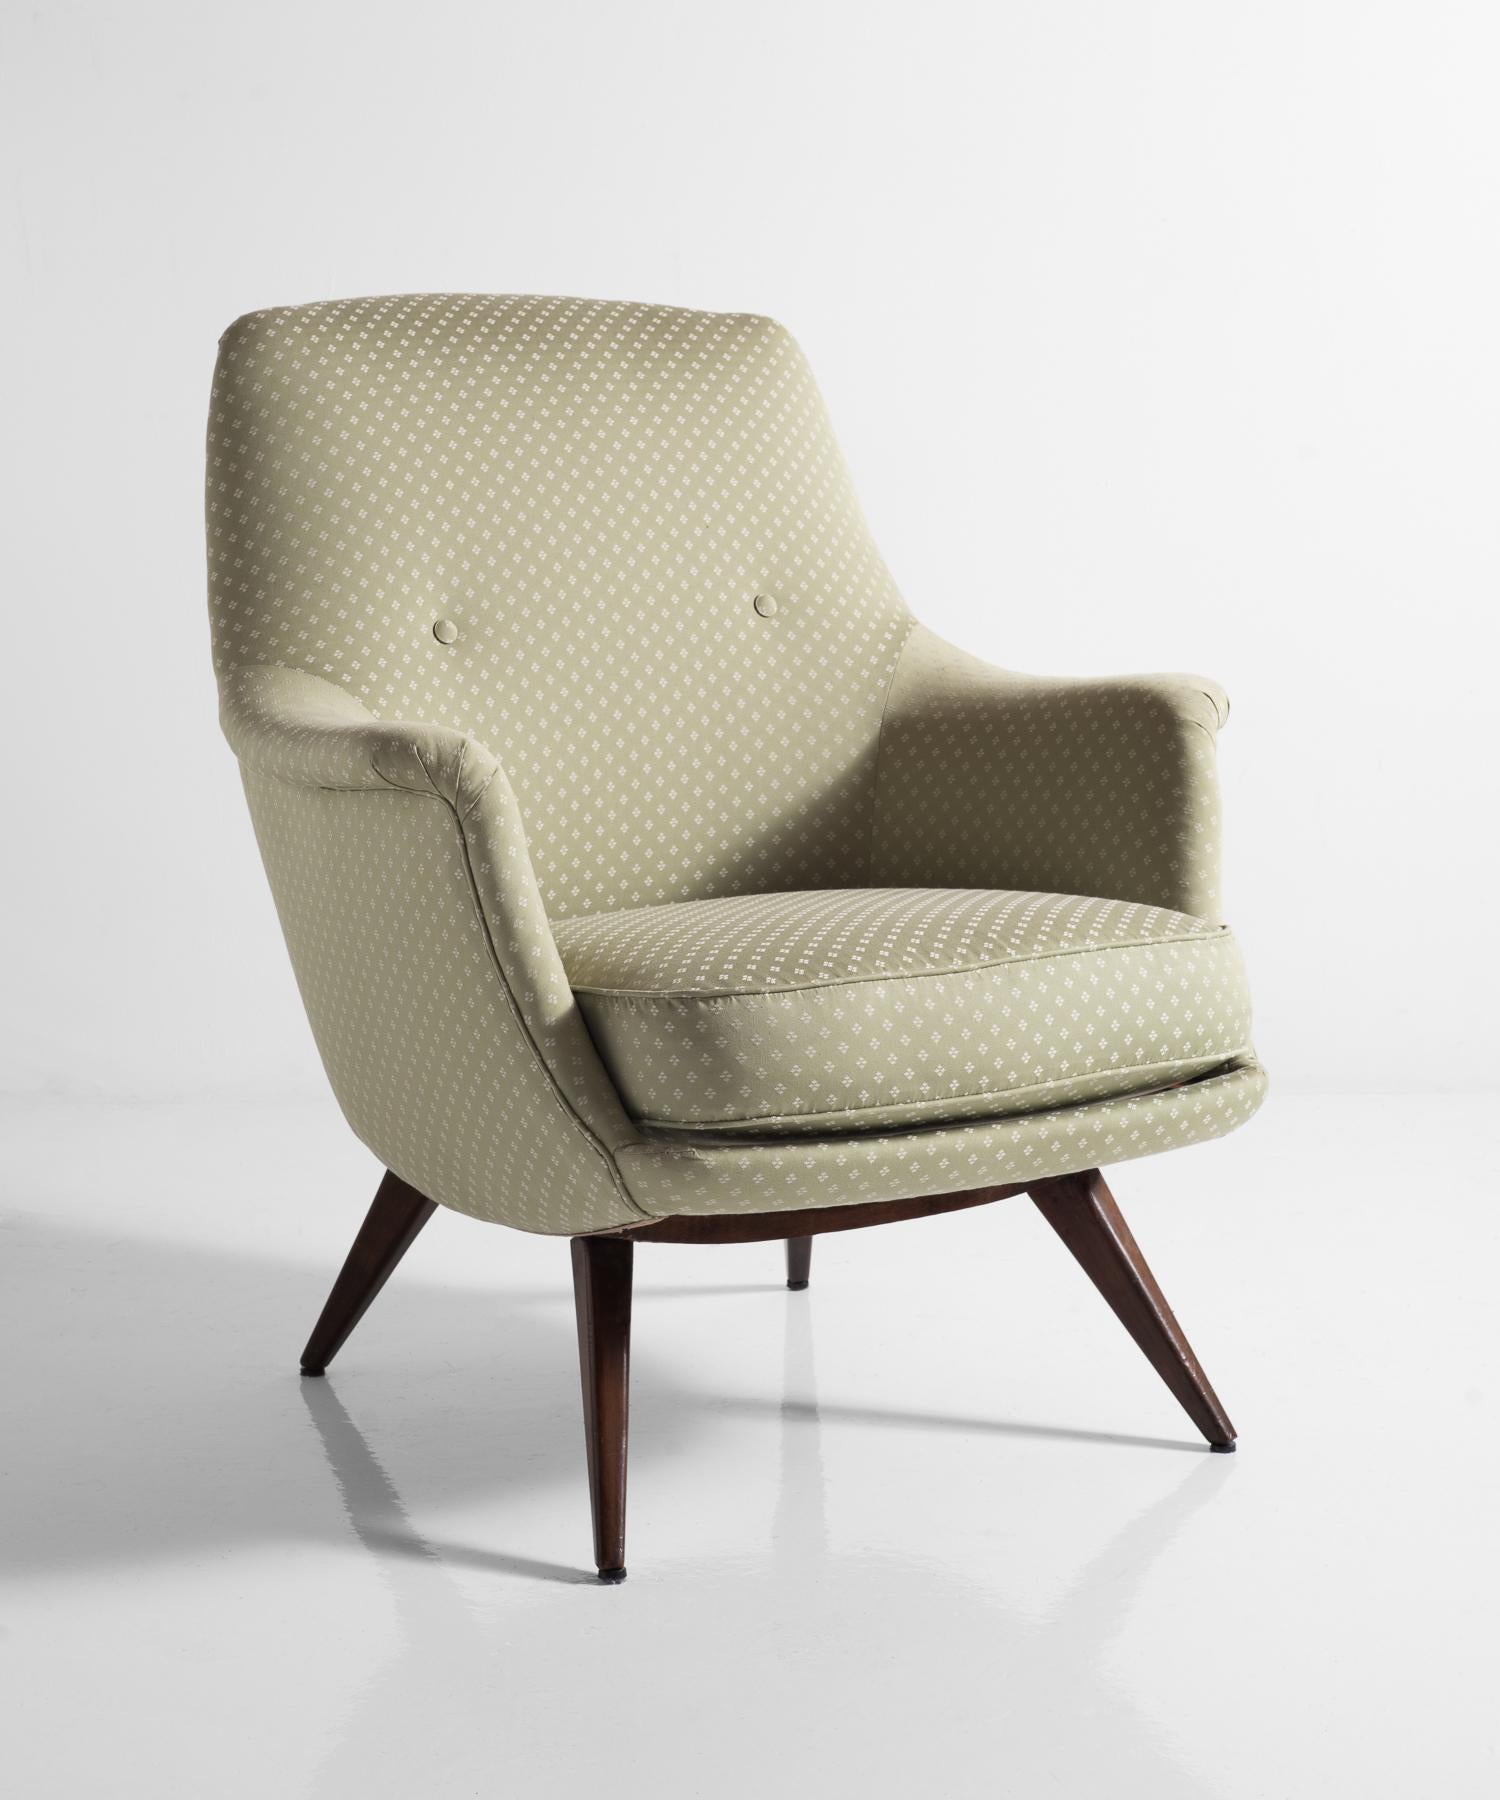 Knoll armchair by K. Antimott, Germany, circa 1950

Designed by Walter Knoll, and newly reupholstered in green cotton fabric by Titley & Marr.